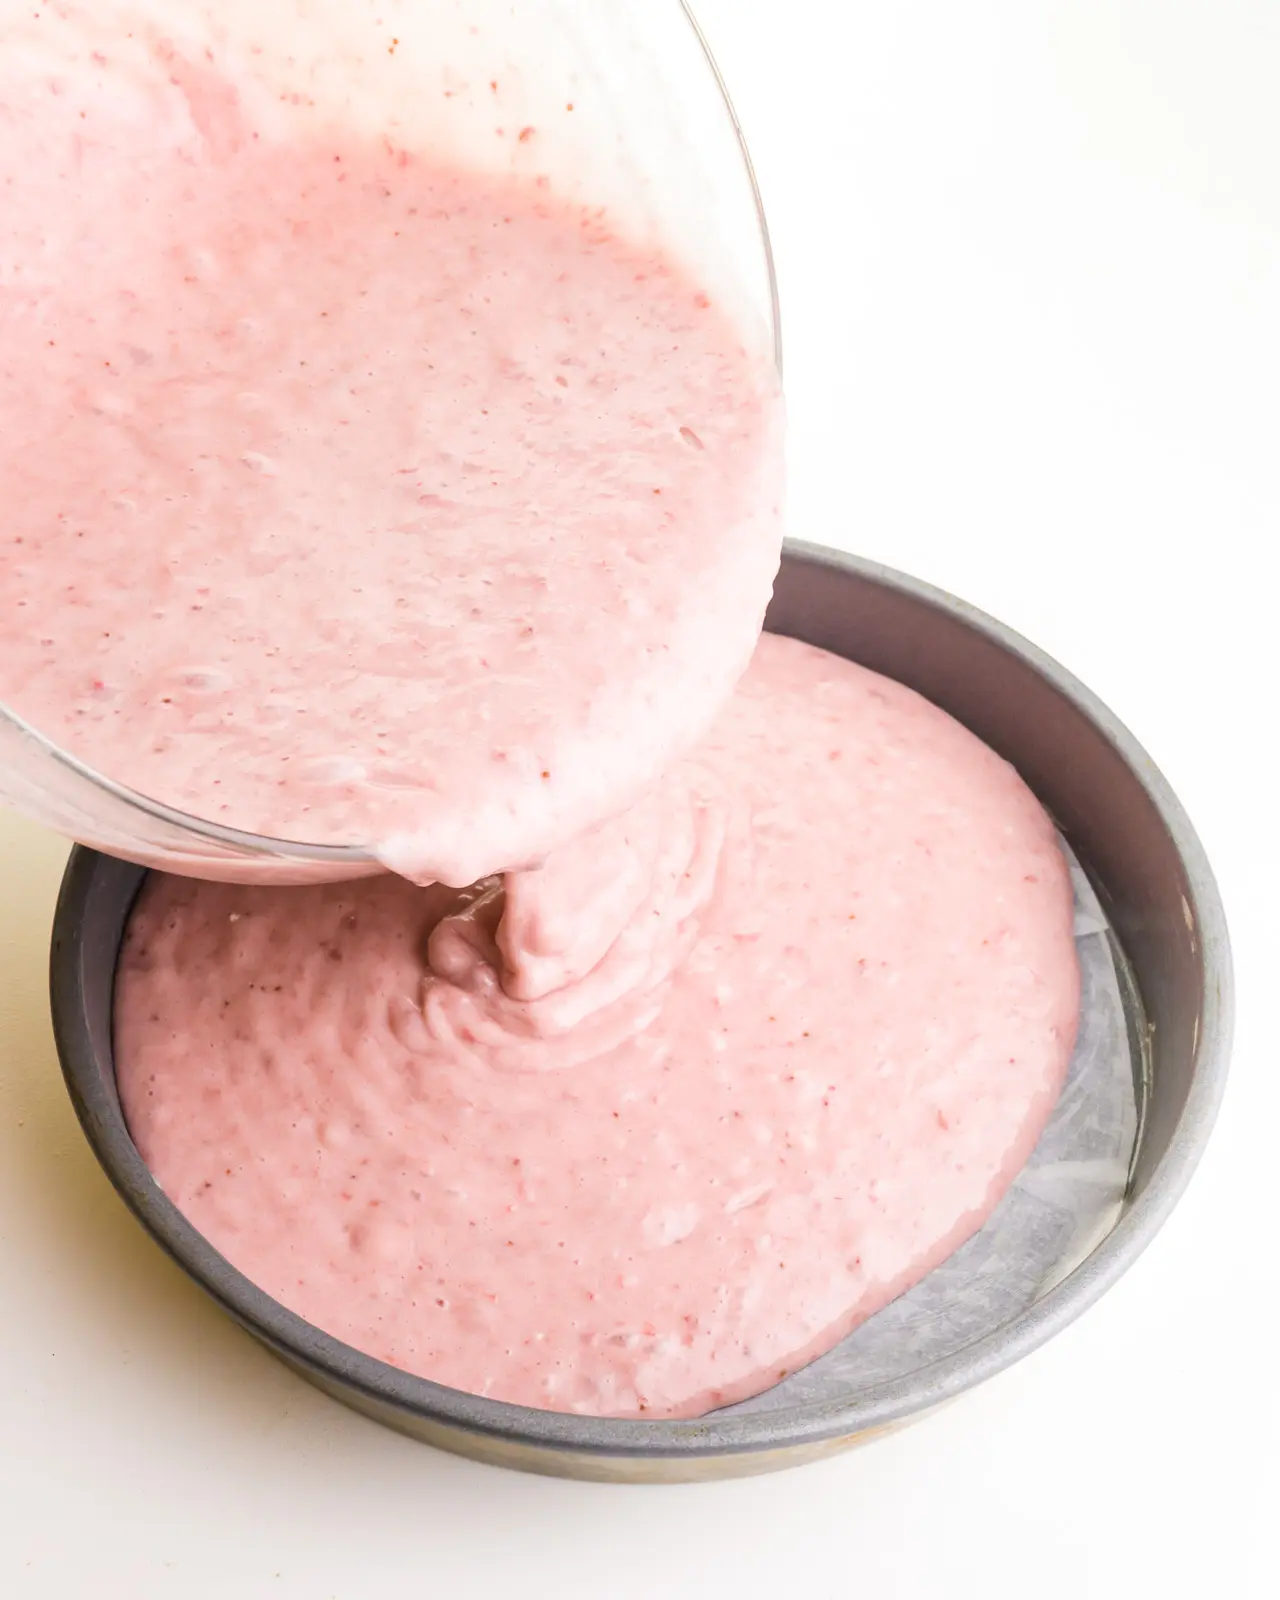 A pink cake batter is being poured into a round baking pan.